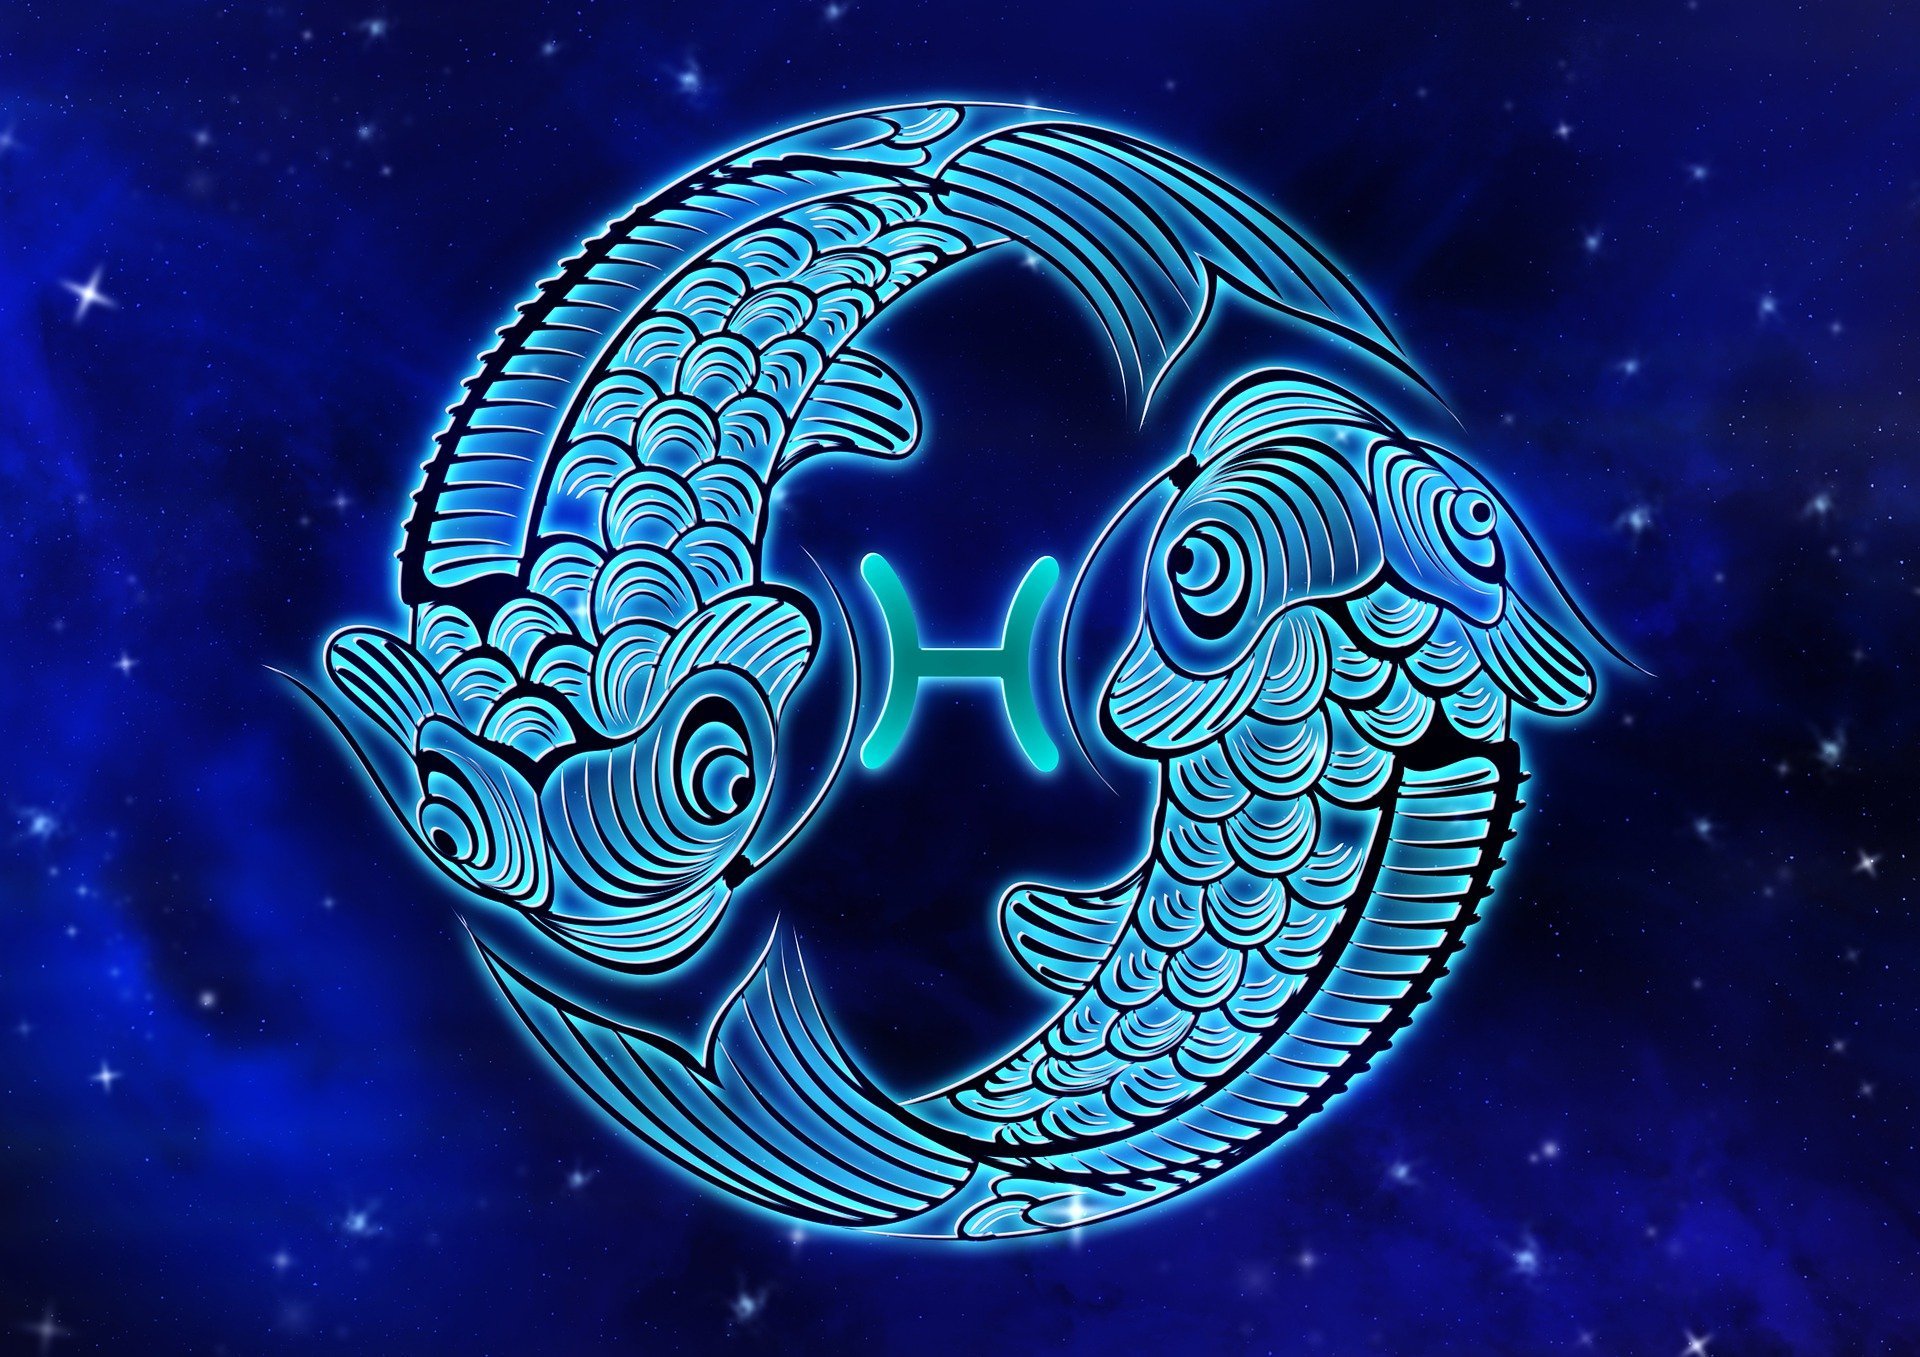 Pictured - A depiction of a Pisces star sign | Source: Pixabay 